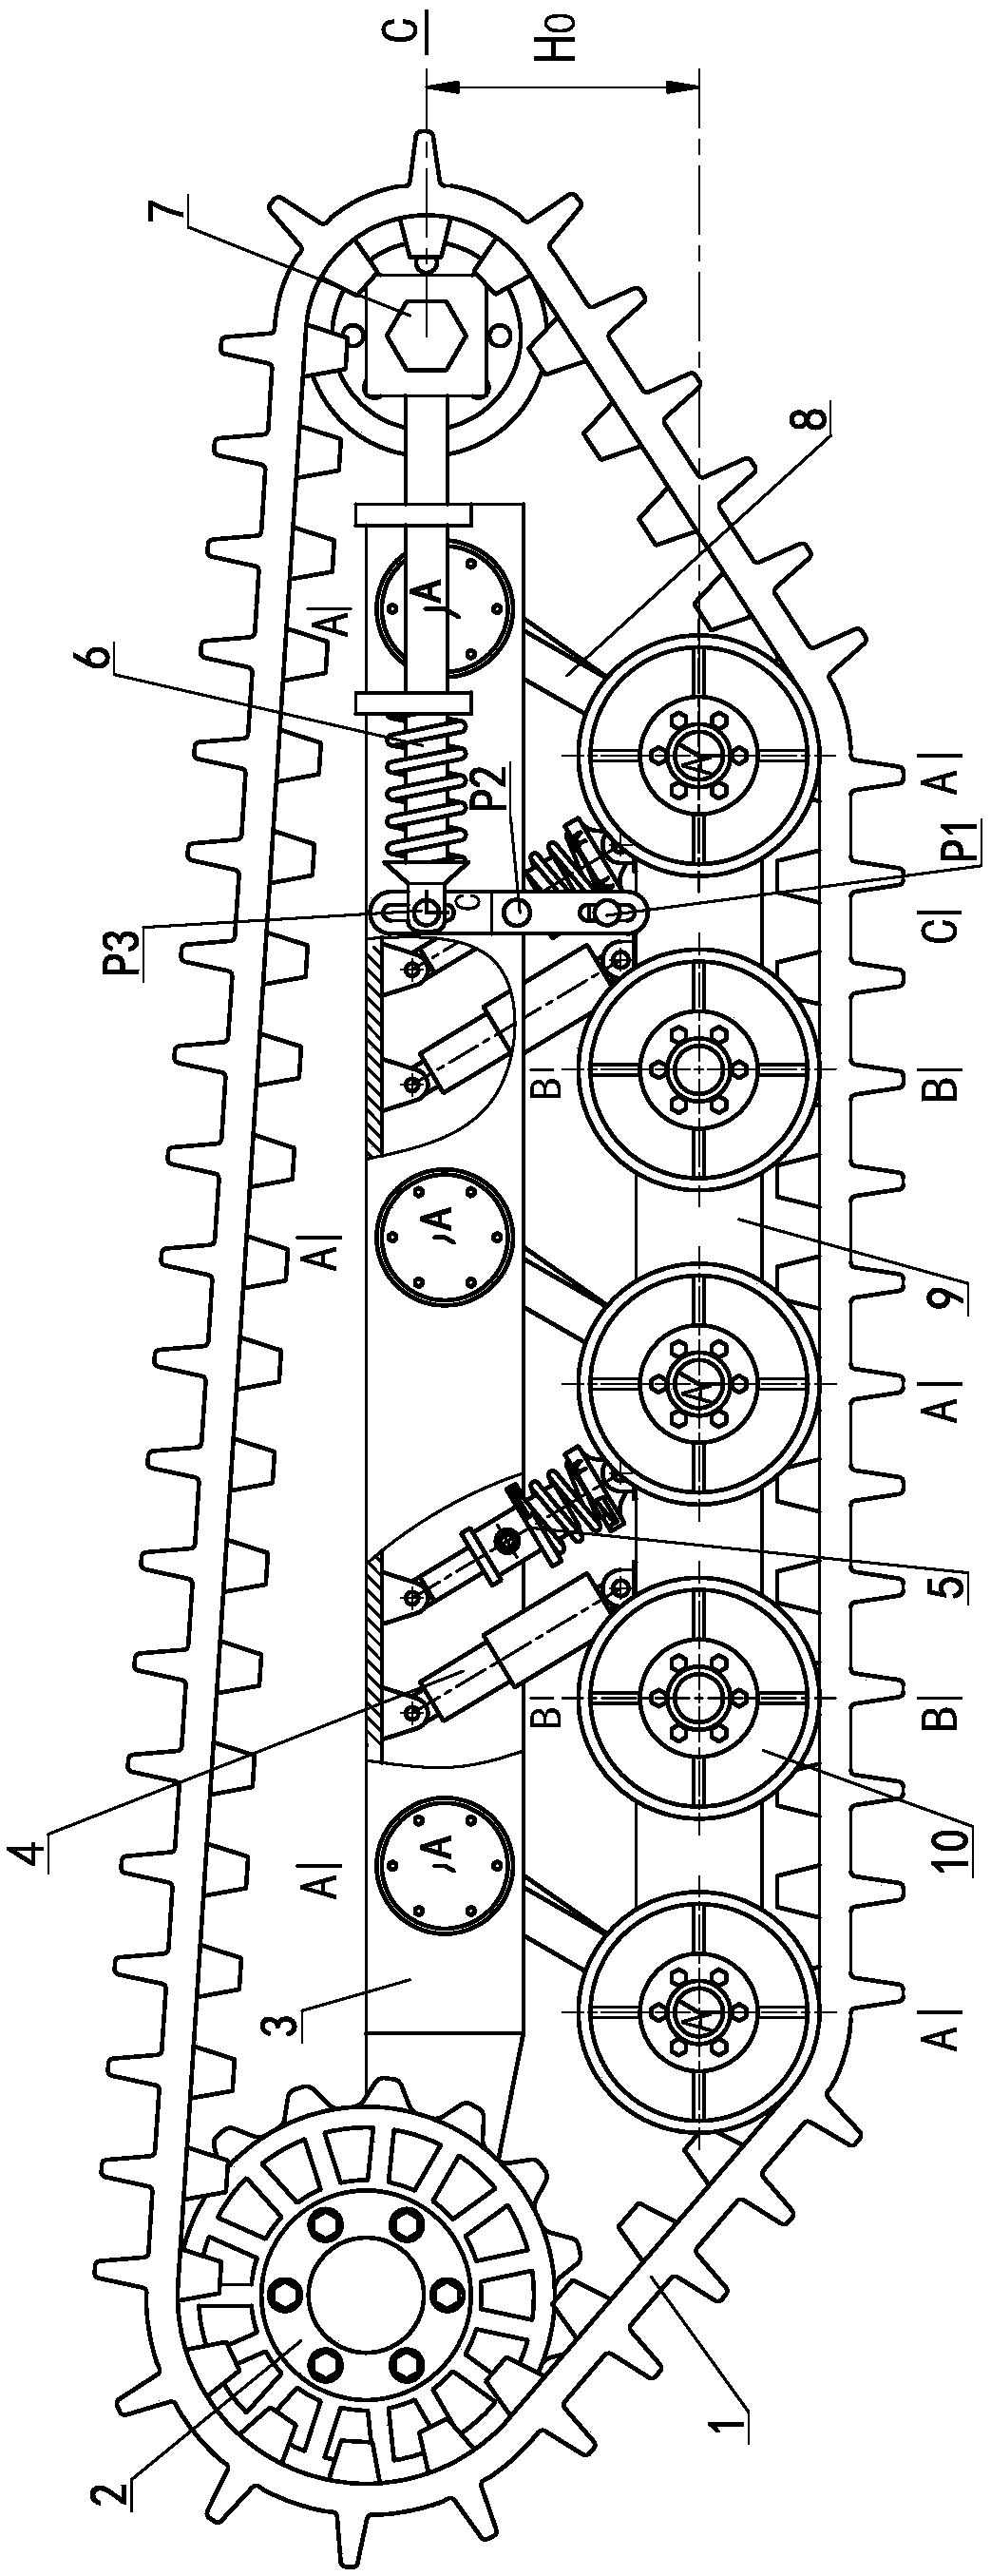 A vibration-absorbing track driving method with adjustable ground clearance